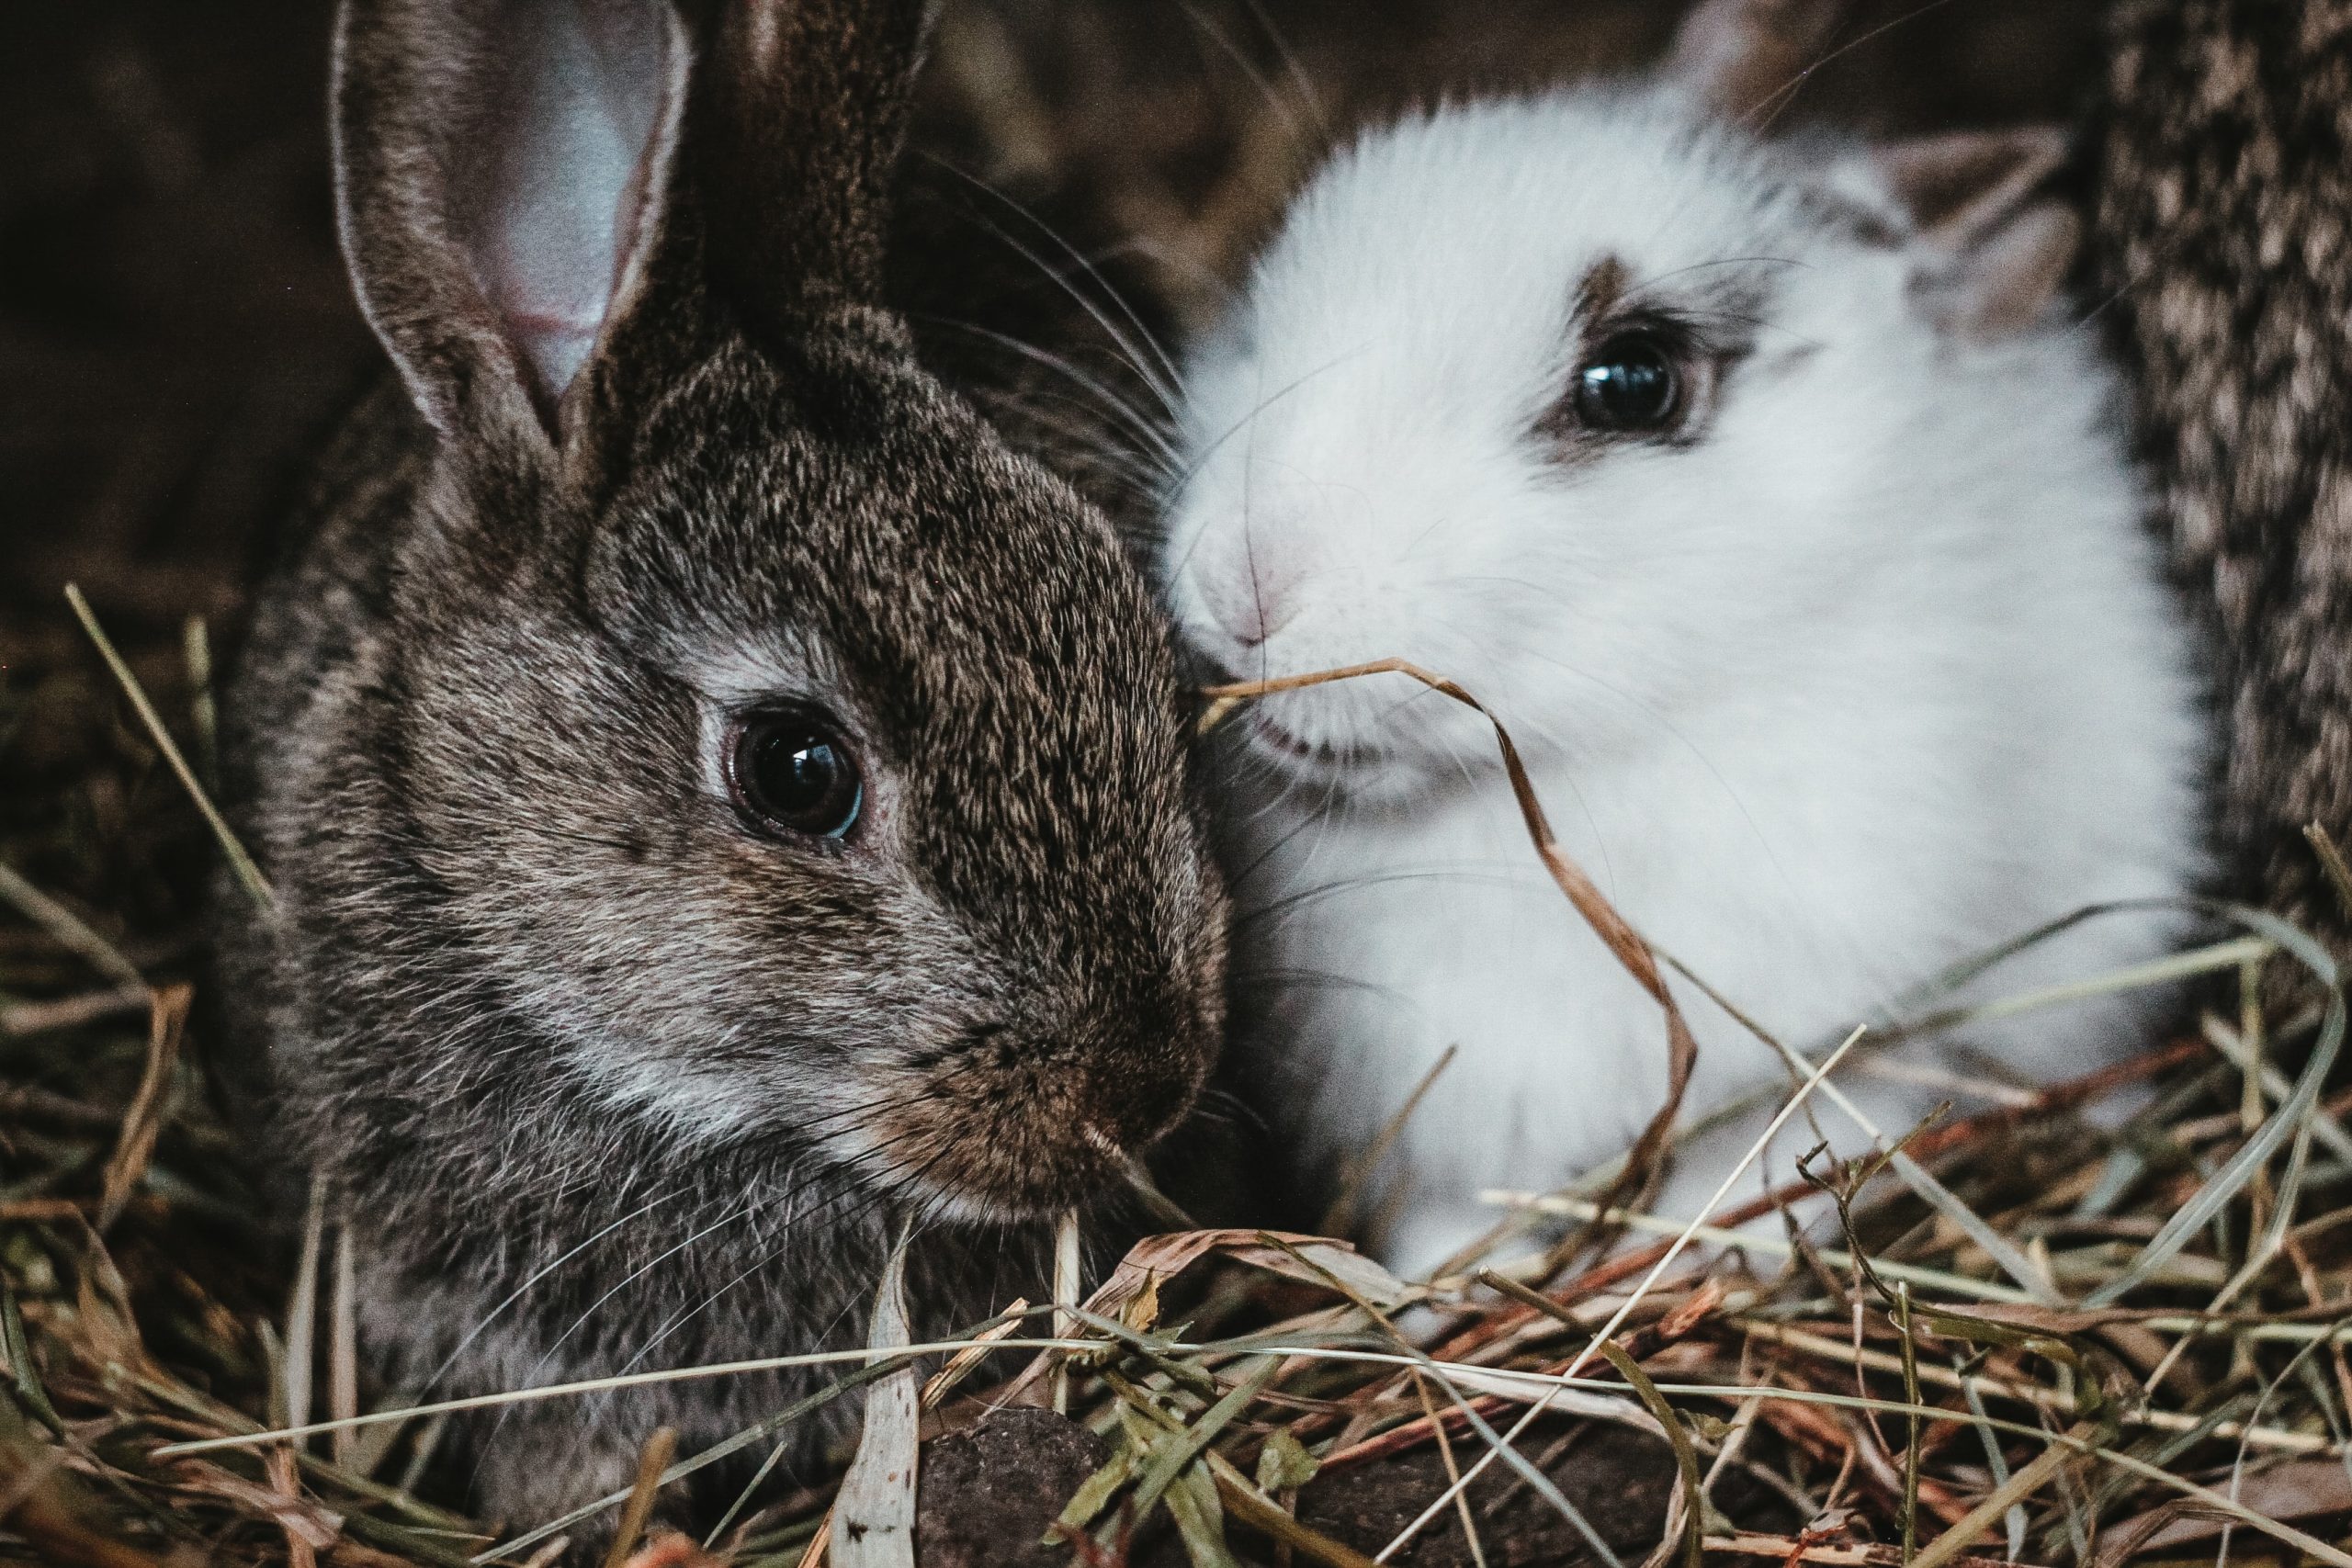 RSPCA: “Amnesty Needed on Breeding and Sale of Pet Rabbits”